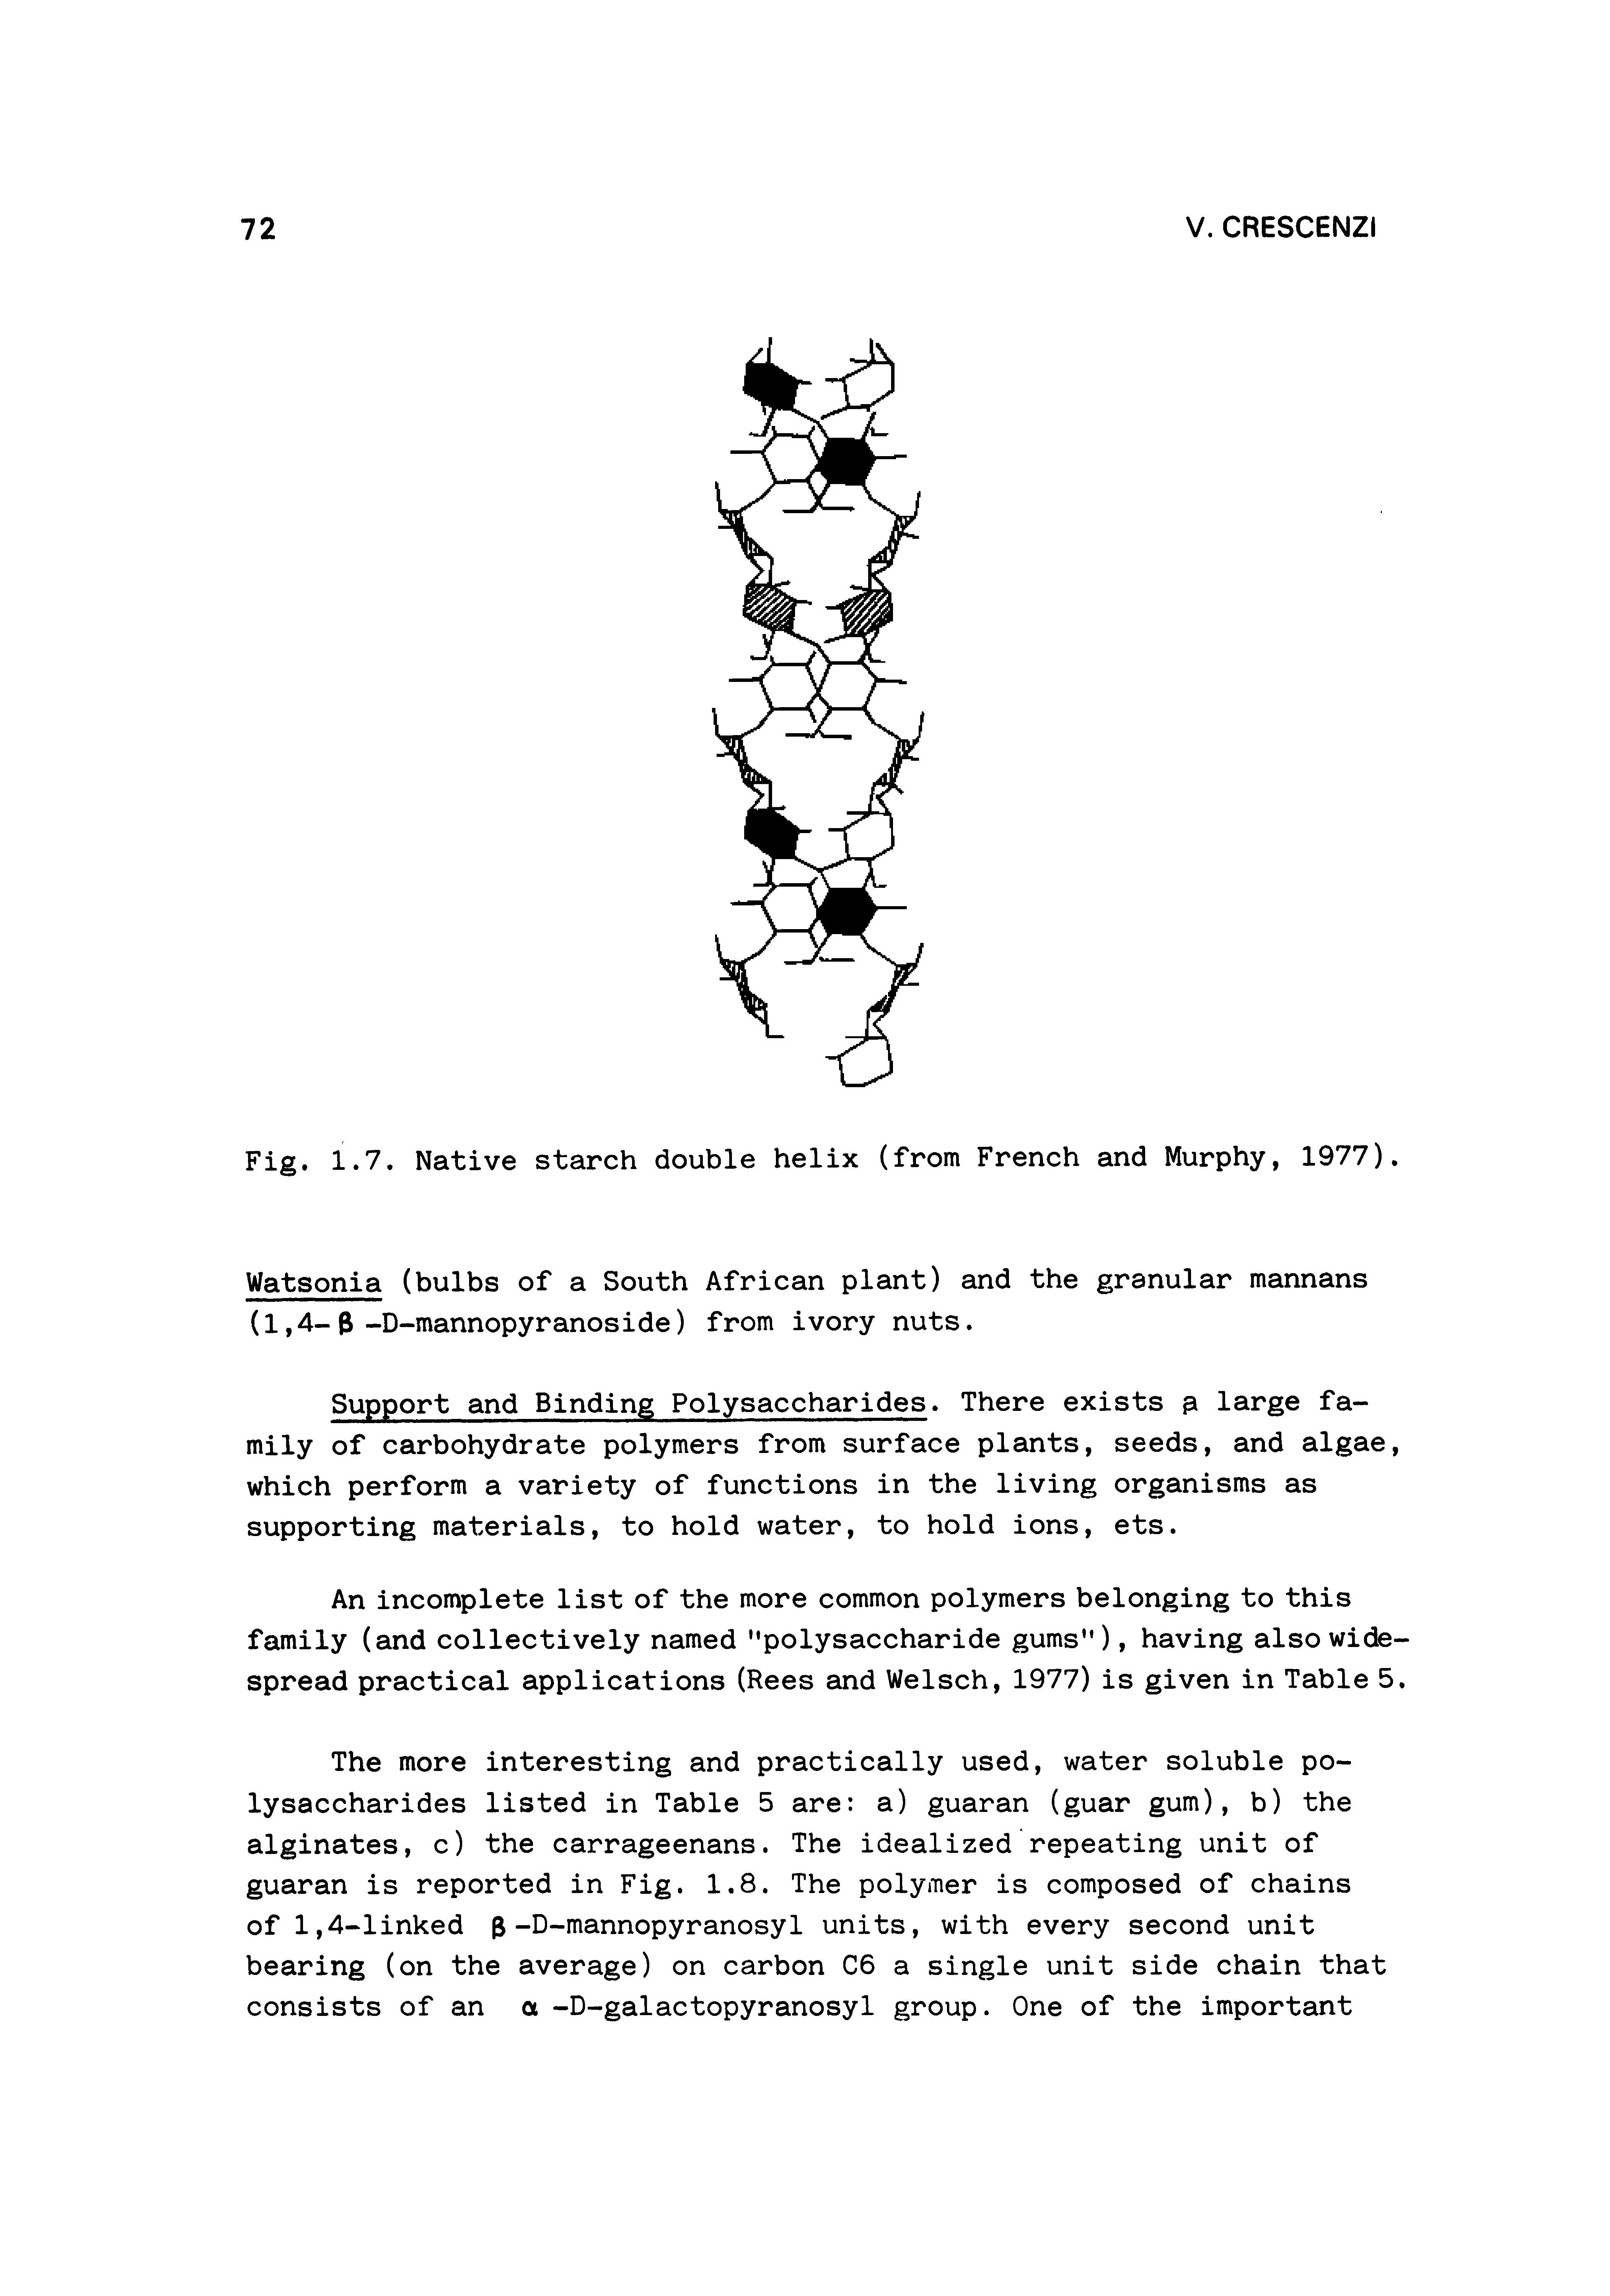 Fig. 1.7. Native starch double helix (from French and Murphy, 1977).